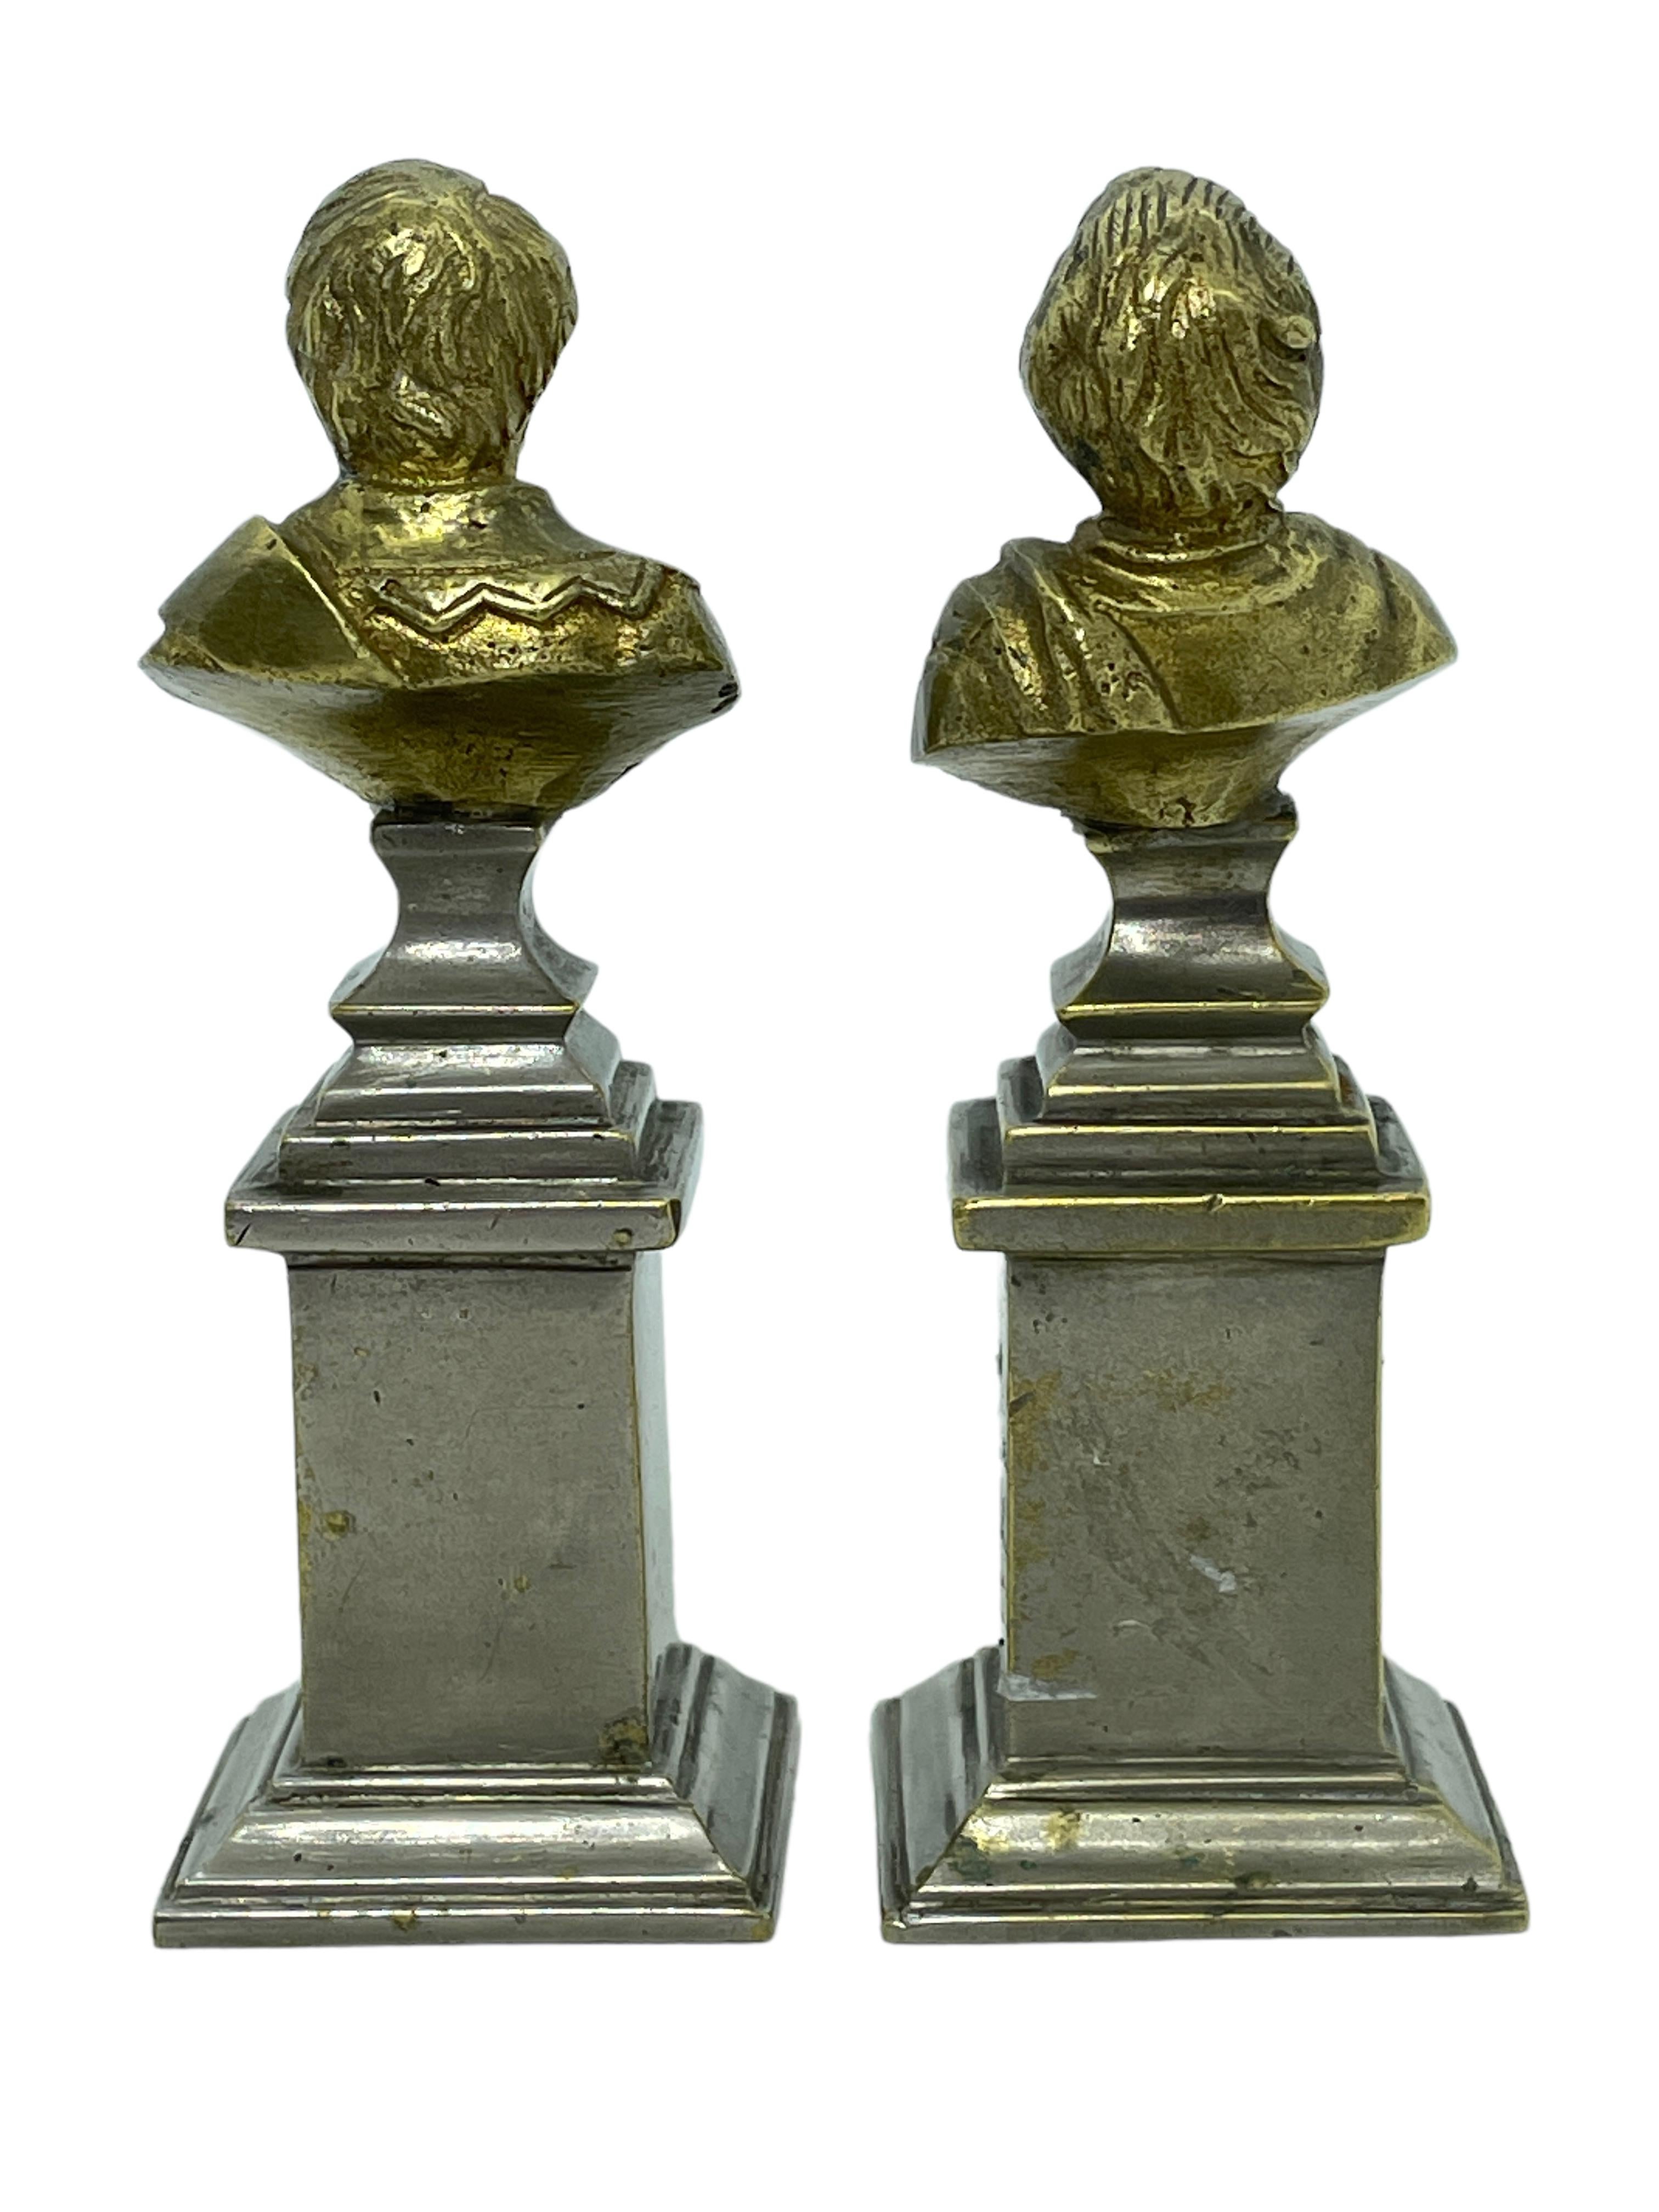 A pair of classic decorative Bust statues. Some wear with a nice patina, but this is old-age. Made of a kind of metal, we think it's brass, socket nickel plated. Very decorative and nice to display in your collection of miniatures or any room.